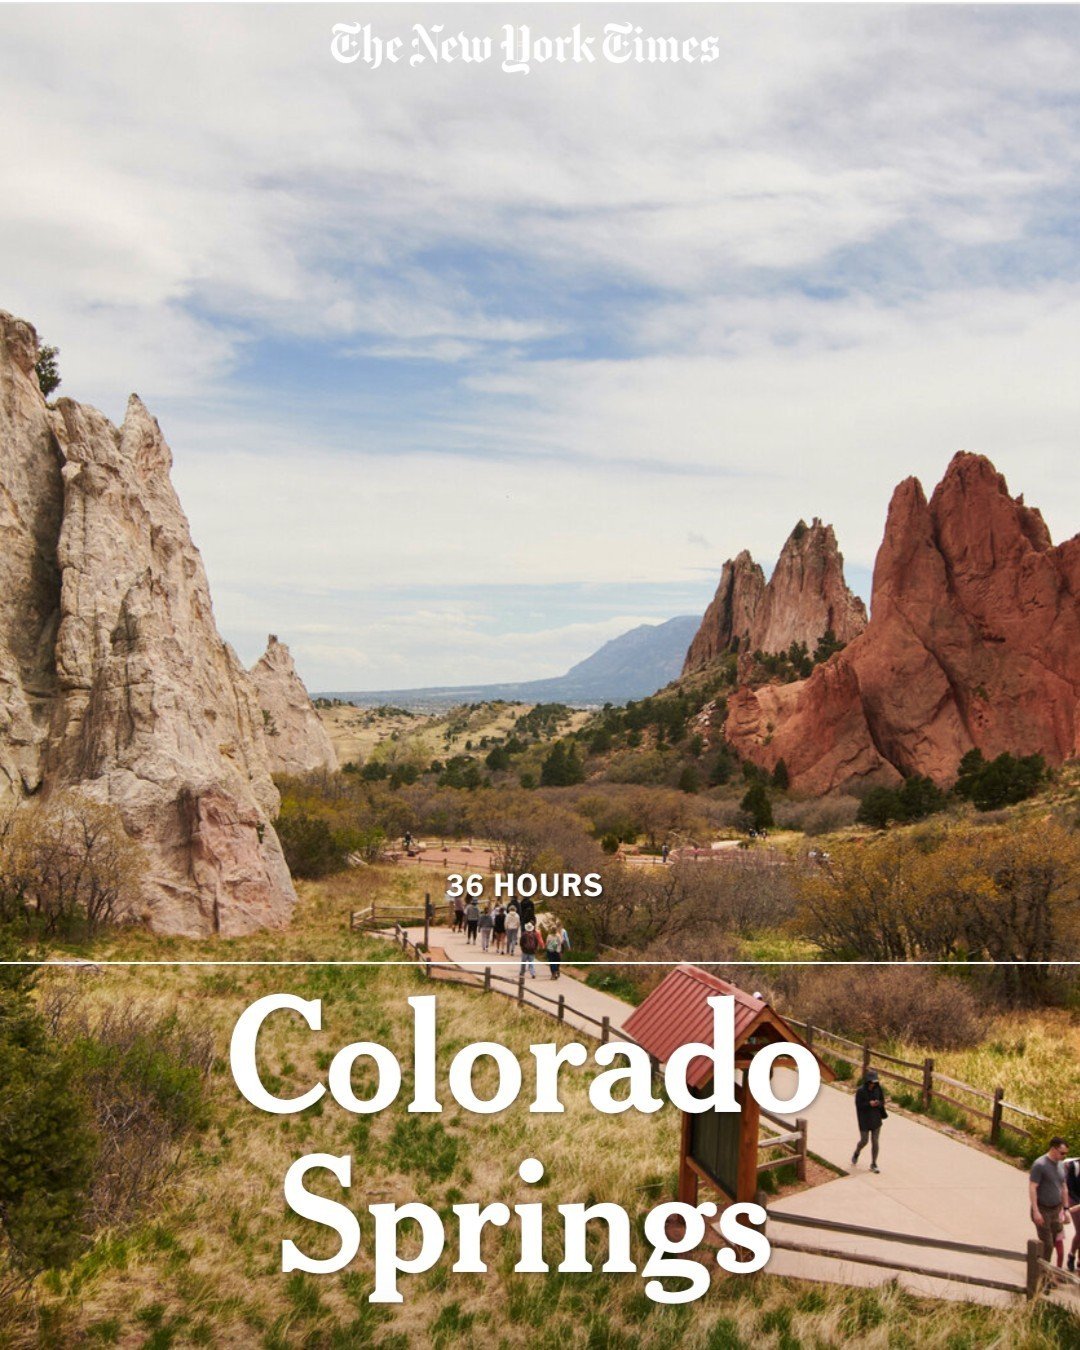 We're so proud to have been featured in The New York Times article &quot;36 Hours in Colorado Springs!&quot; Find THREE Blue Star Group concepts listed, including @IvywildKitchen, @GoldStarBakeryatIvywild, and @POatIvywild. Come visit us at Ivywild S